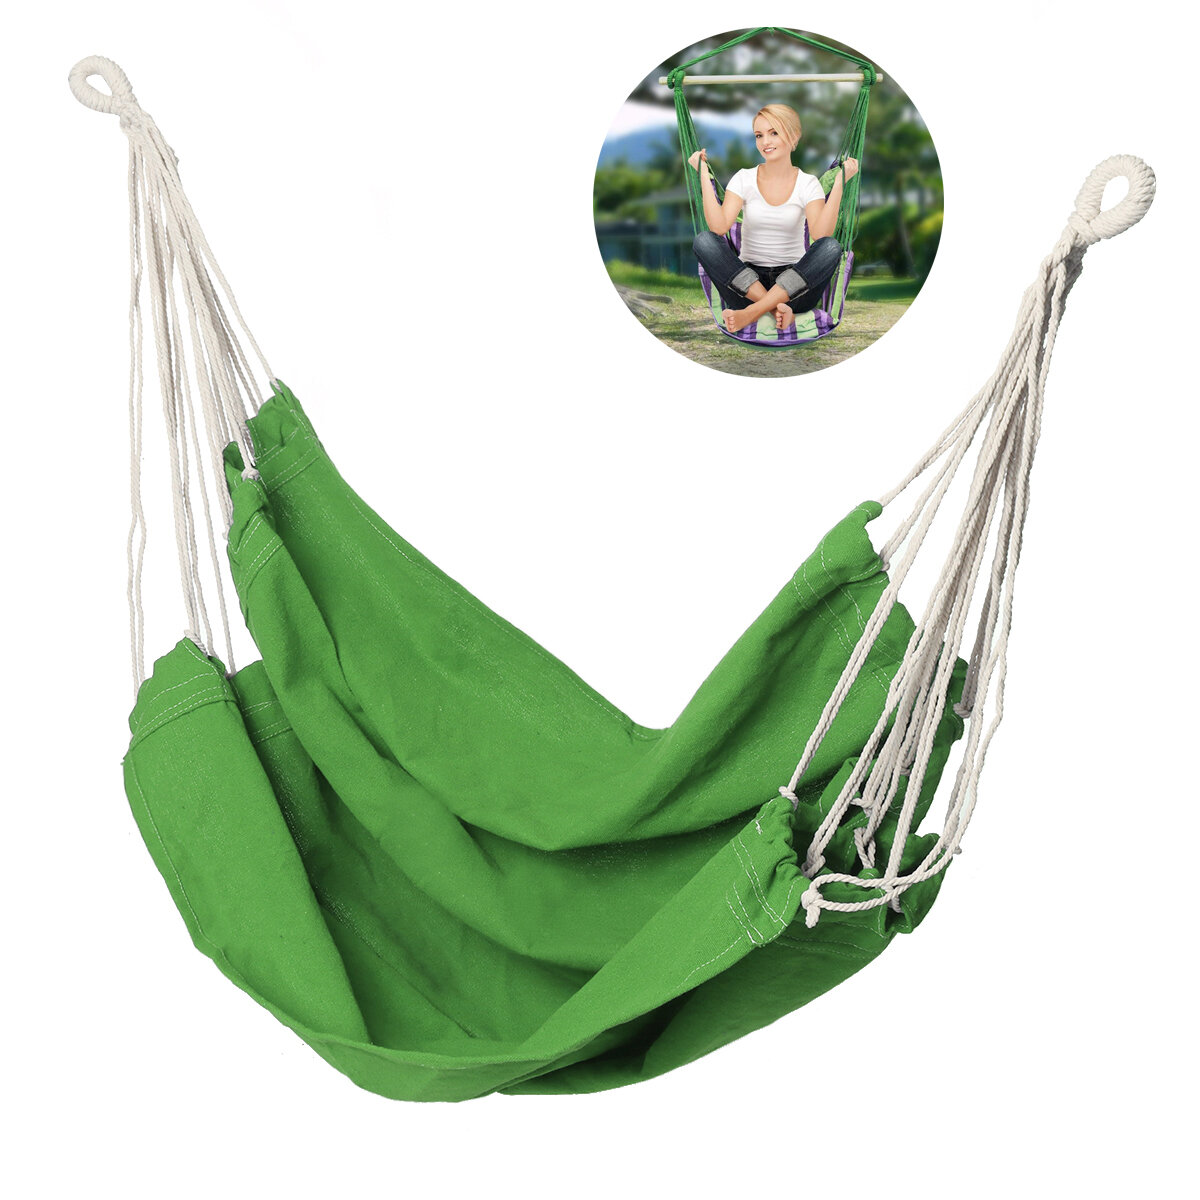 100x150cm 120kg Max Load Υφασμα Hammock Chair Hanging Seat Outdoor Garden Swing Camping Travel